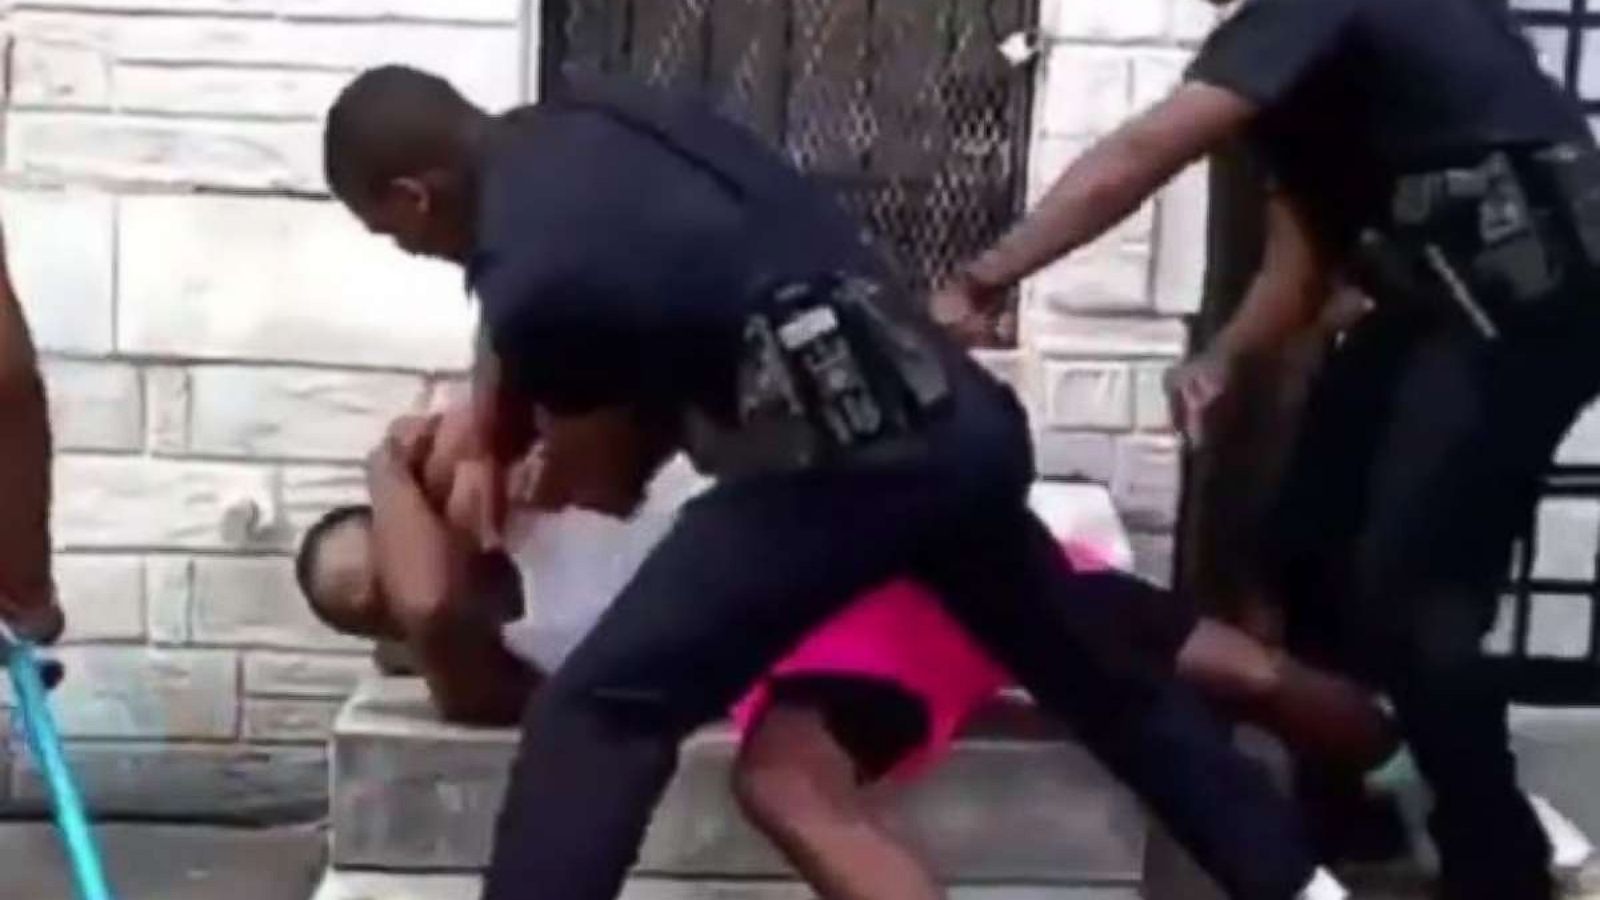 Baltimore Cop Suspended After Viral Video Shows Him Violently Punching Man